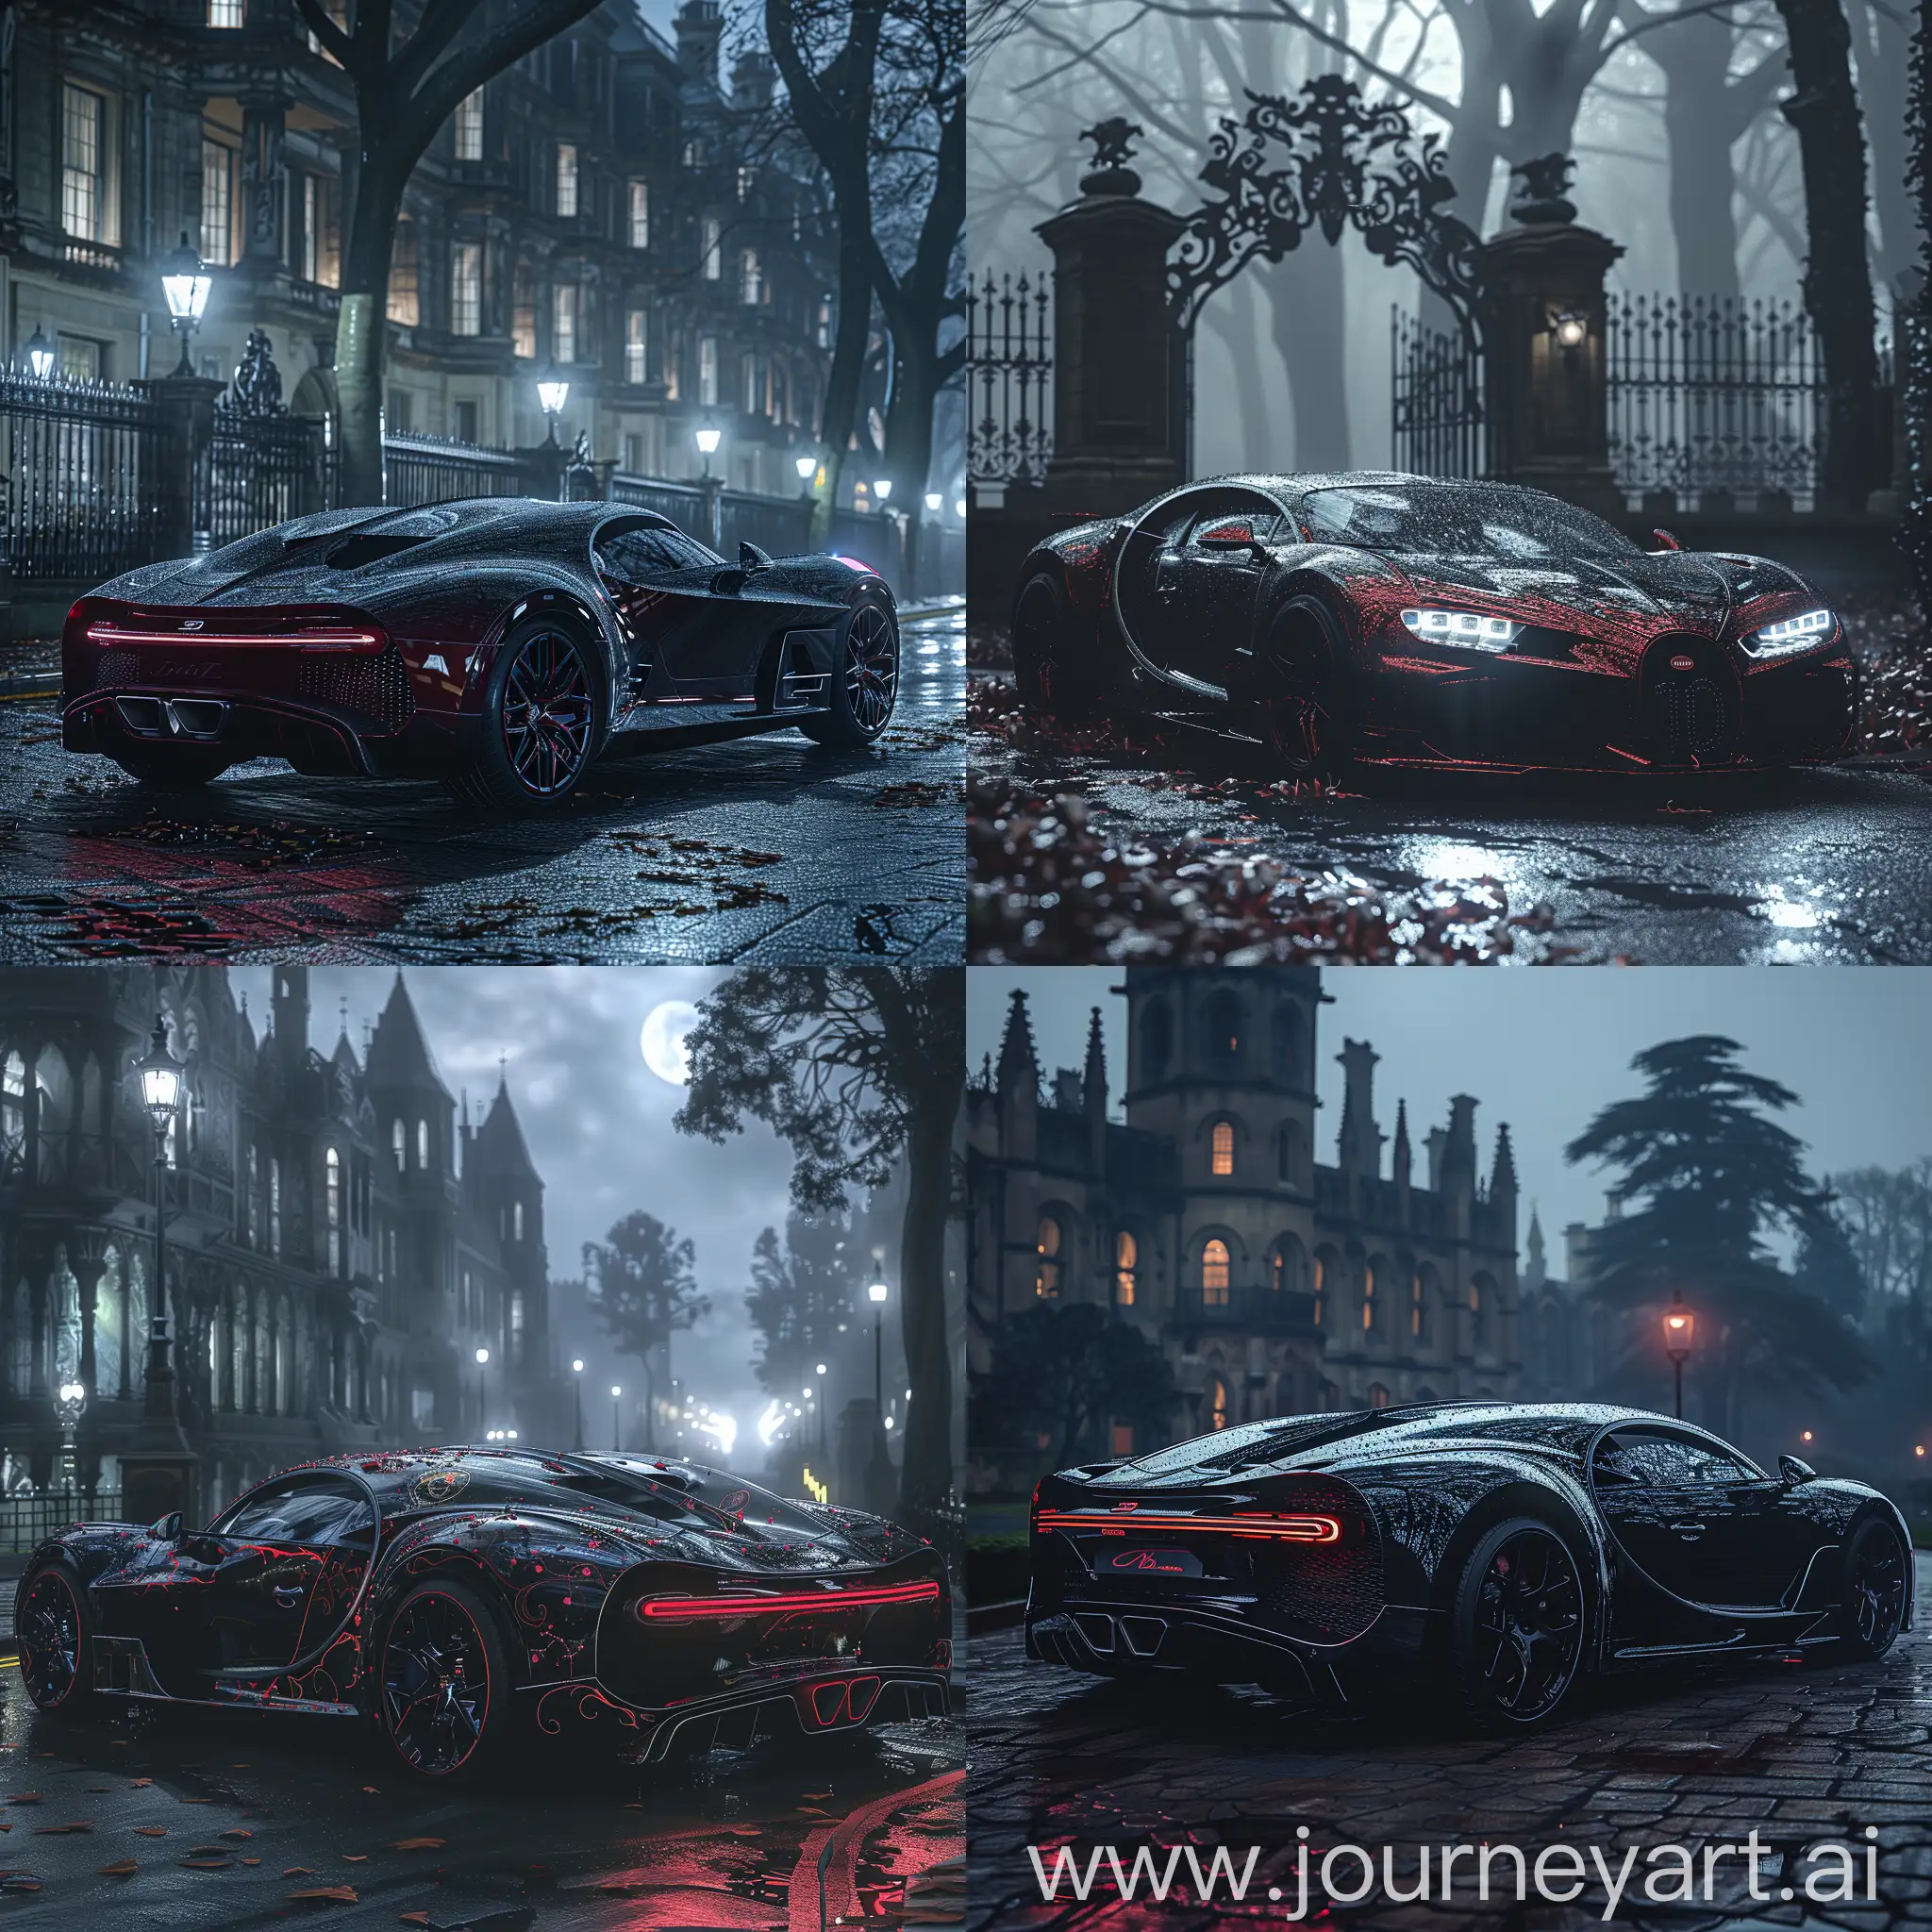 Gothic-Bugatti-in-Misty-Moonlit-Night-with-Victorian-Architecture